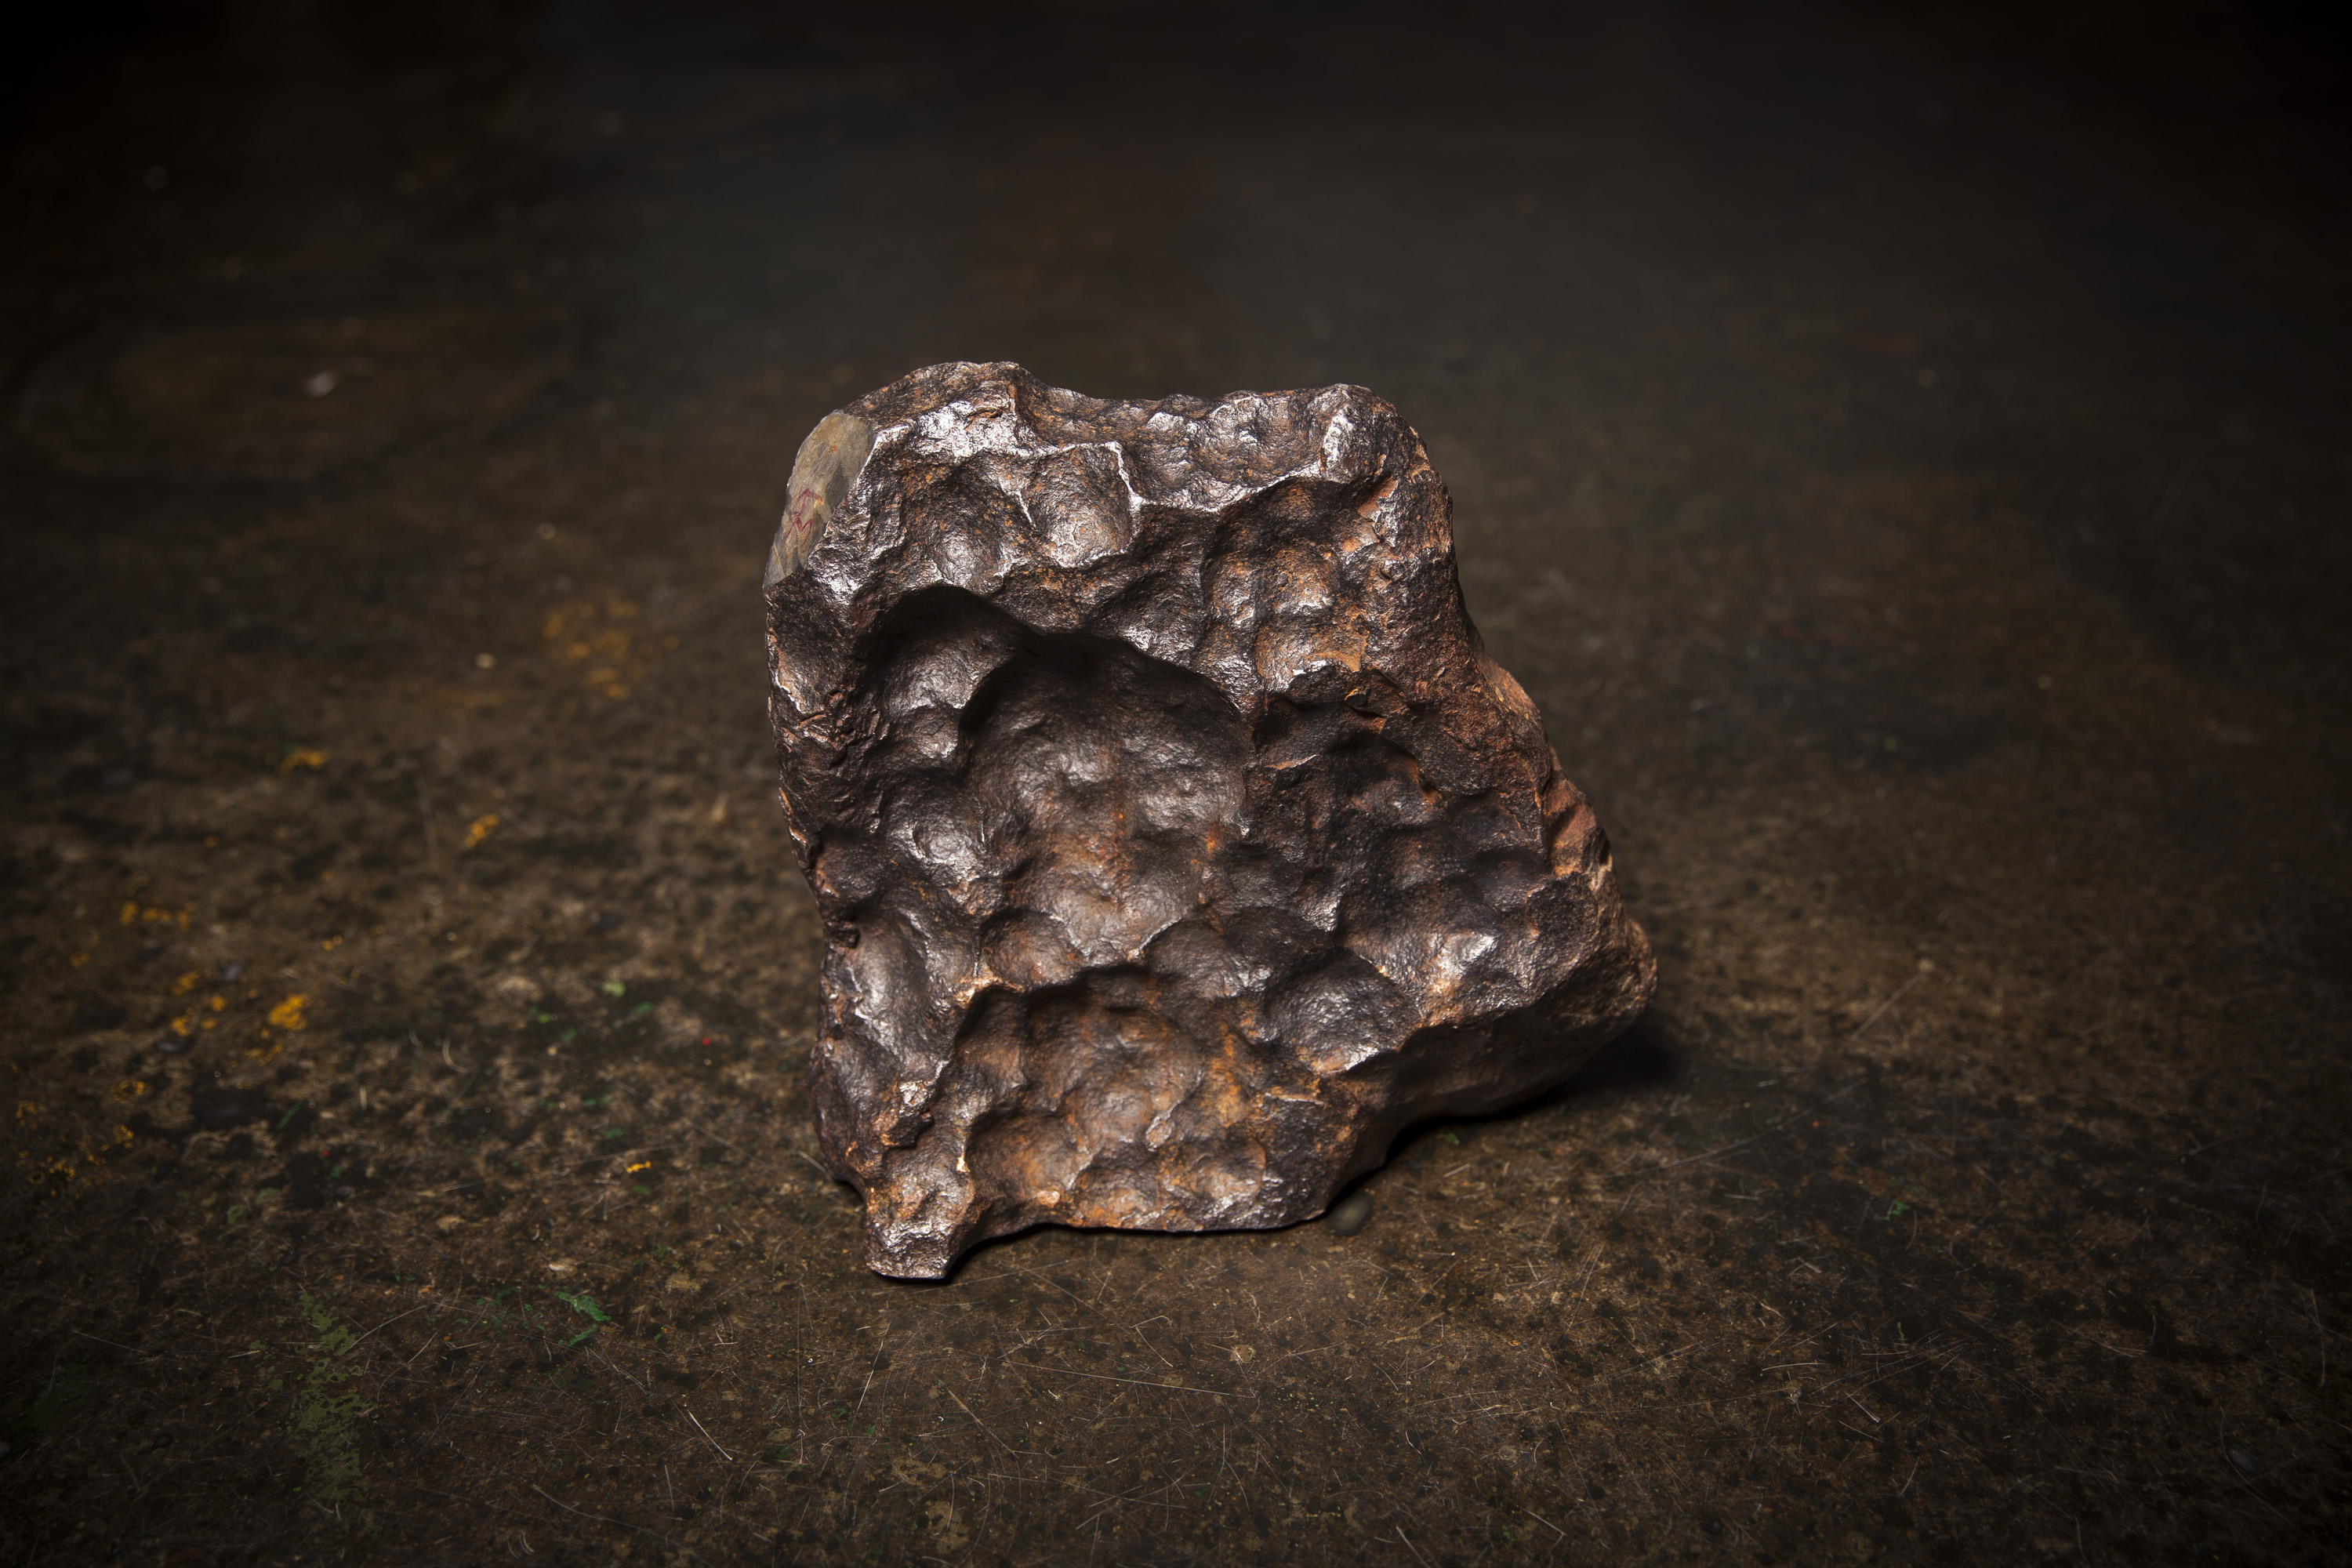 35 kg section of the Gibeon Meteorite